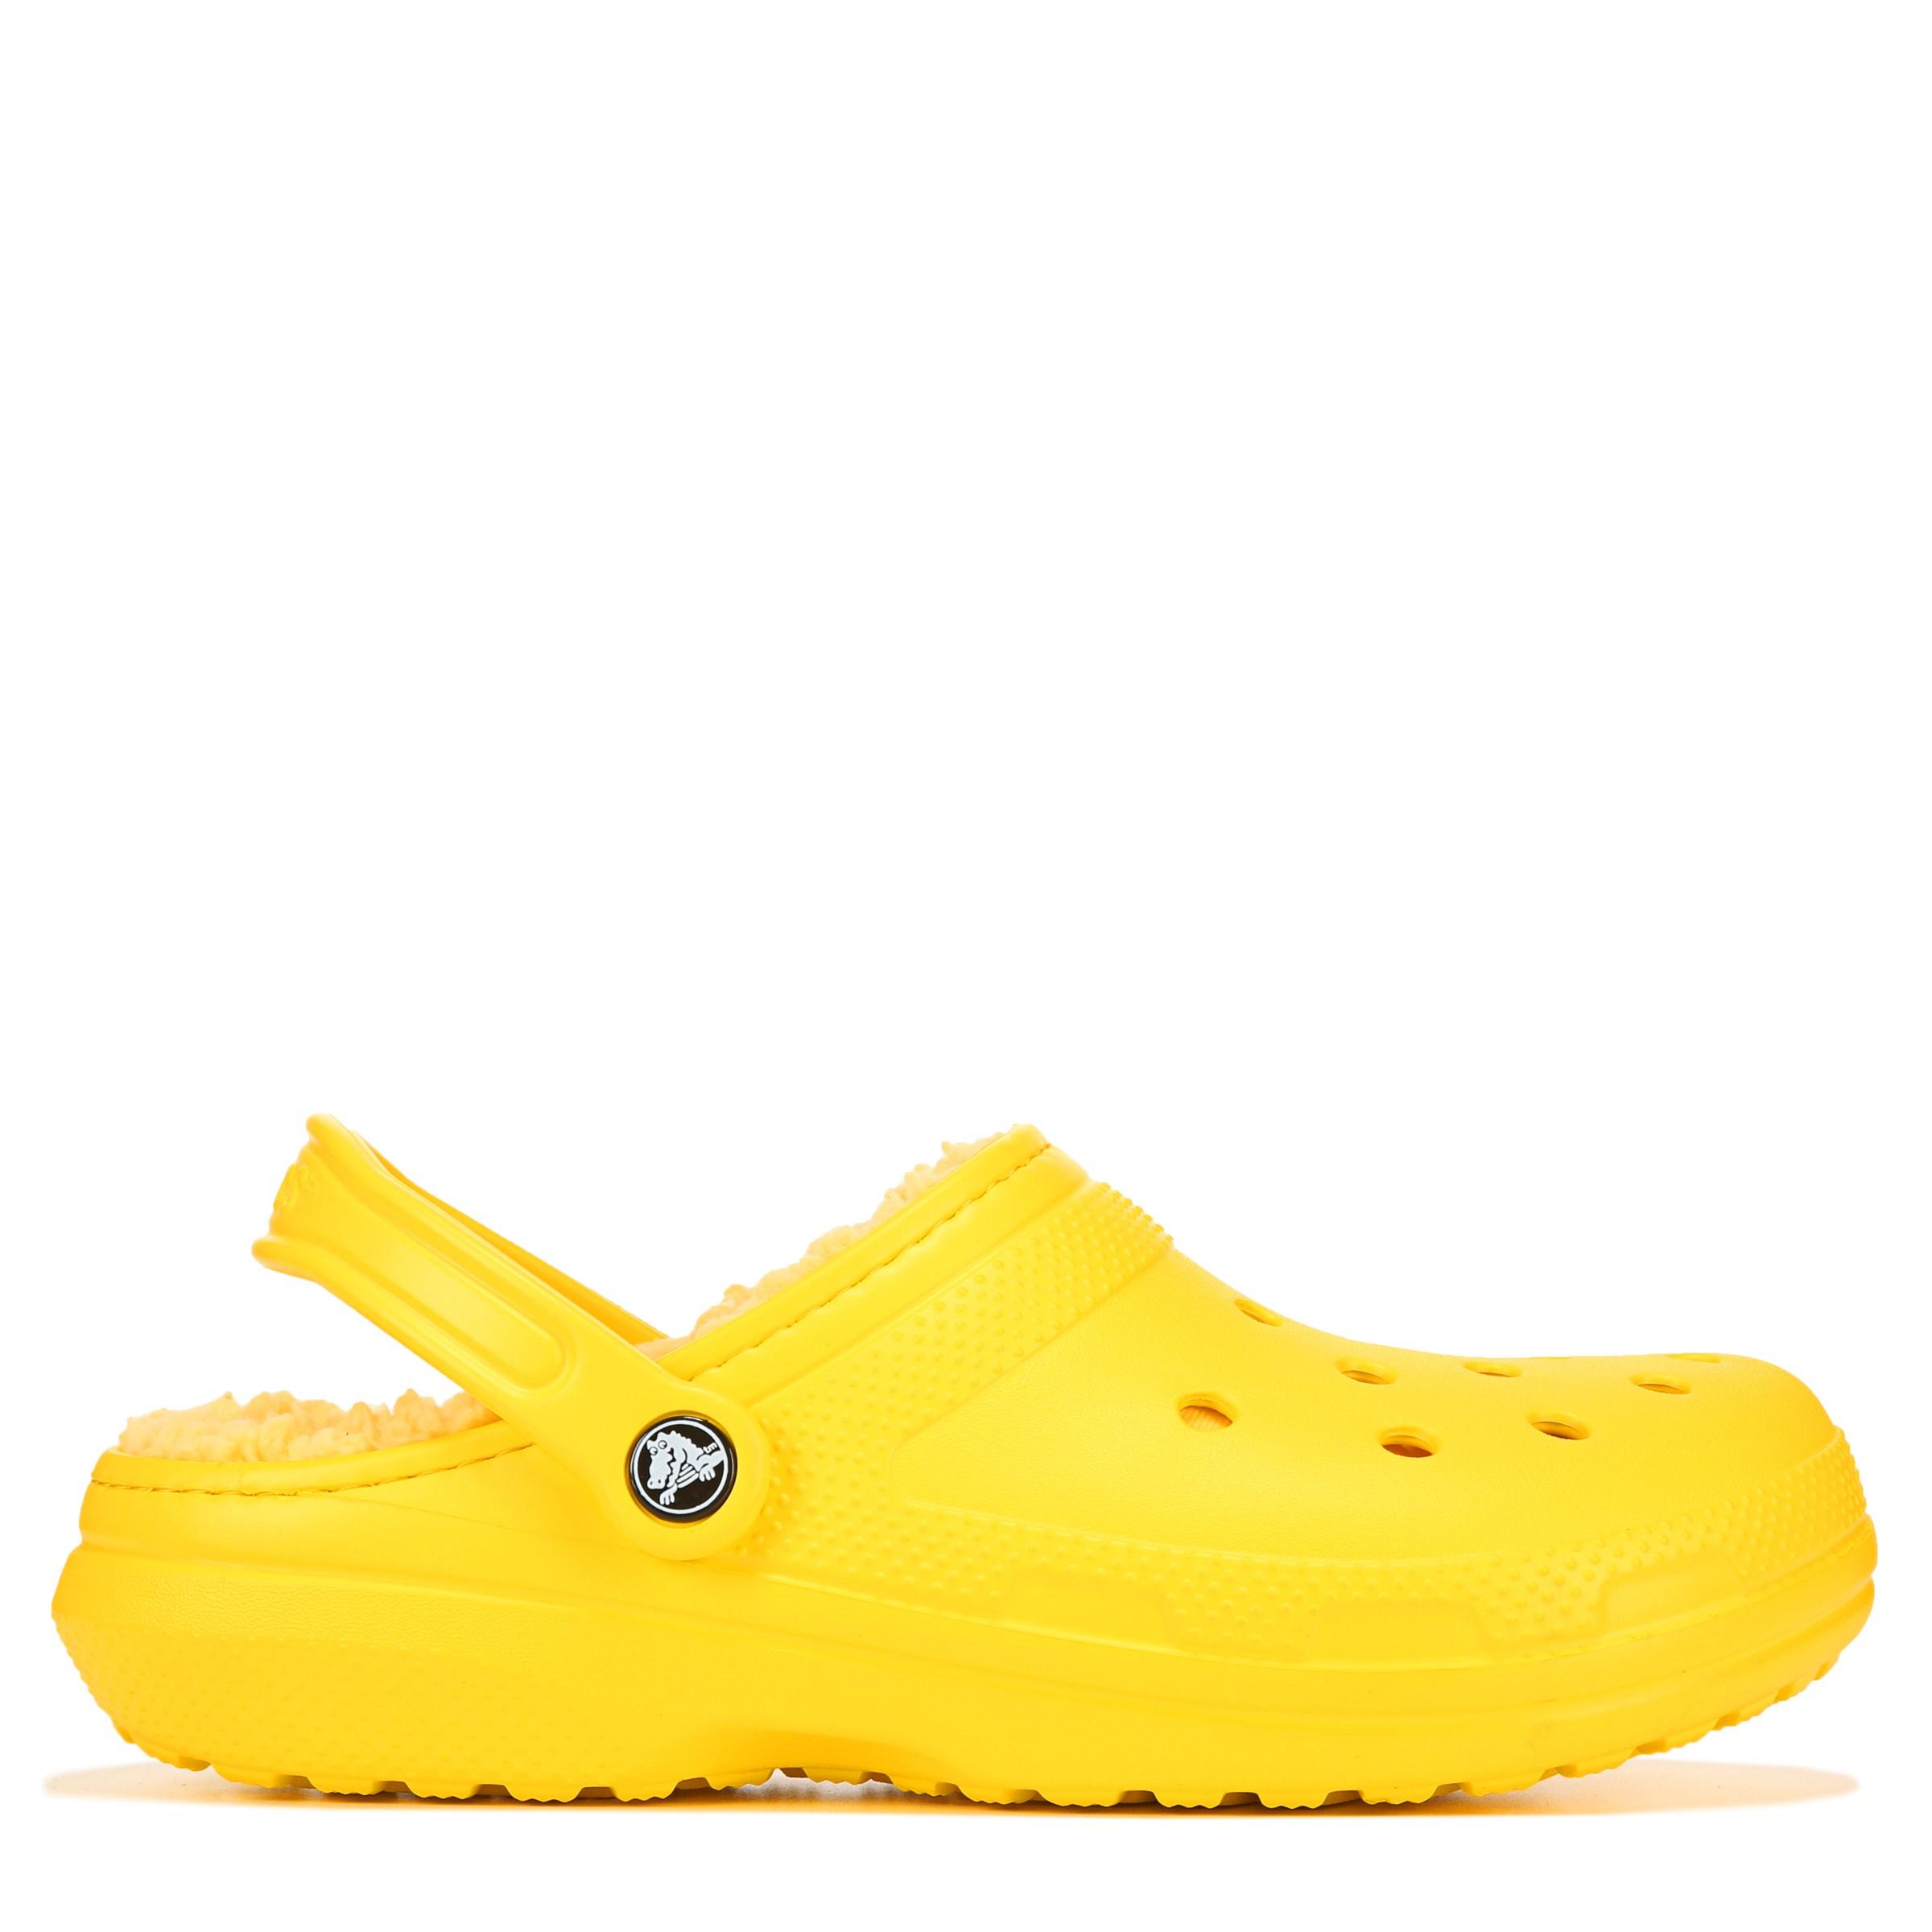 Crocs™ Classic Fuzz Lined Clog Sandals in Lemon (Yellow) for Men - Lyst